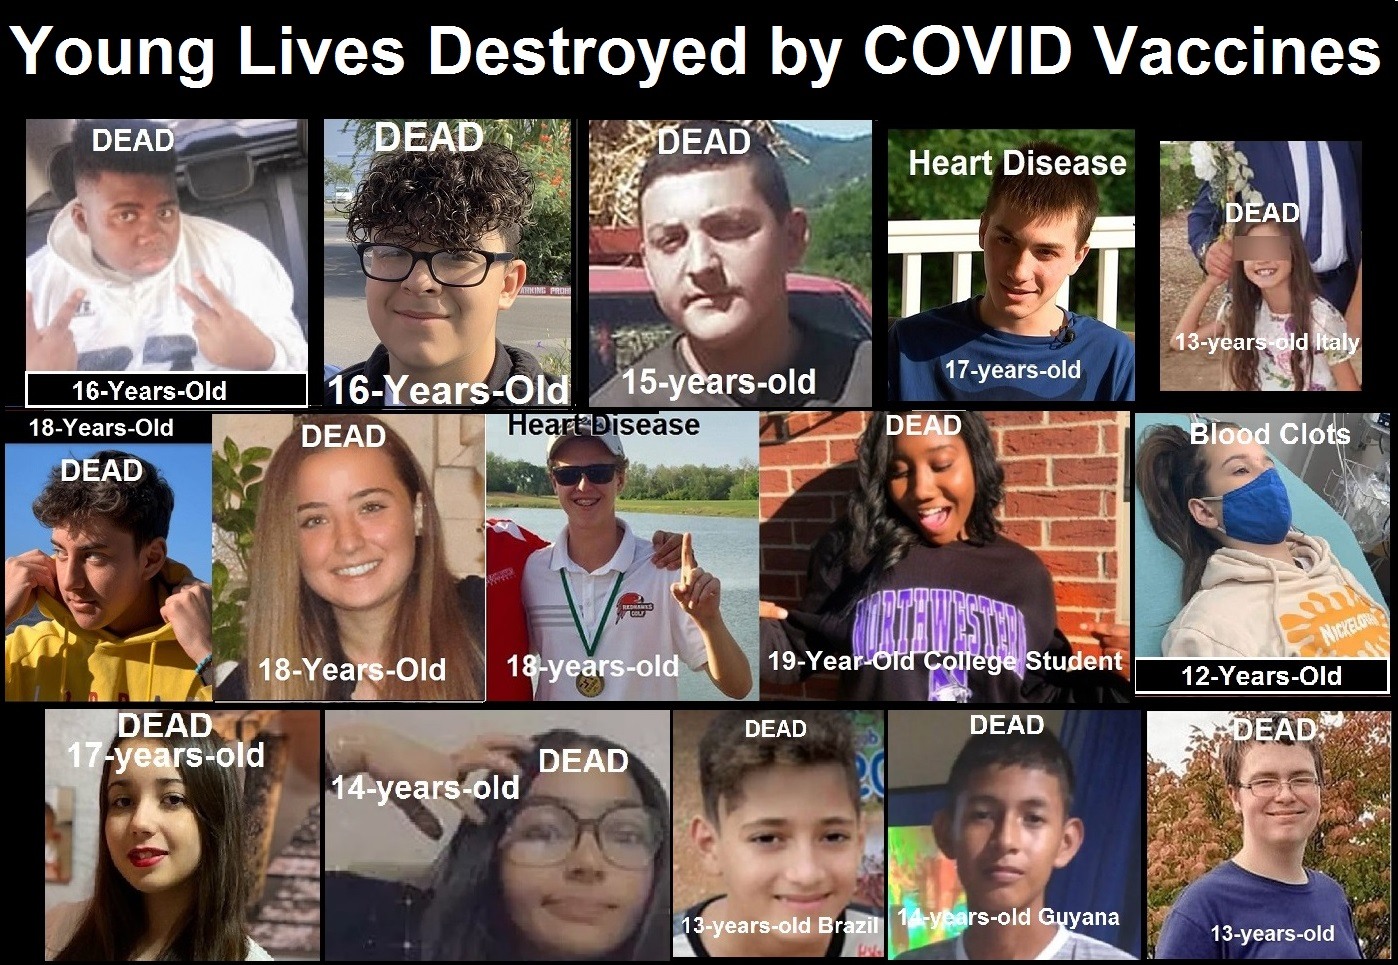 Young lives destroyed by covid vaccines | 76,253 dead 6,033,218 injured recorded in europe and usa following covid vaccines with 4,358 fetal deaths in u.s. | health